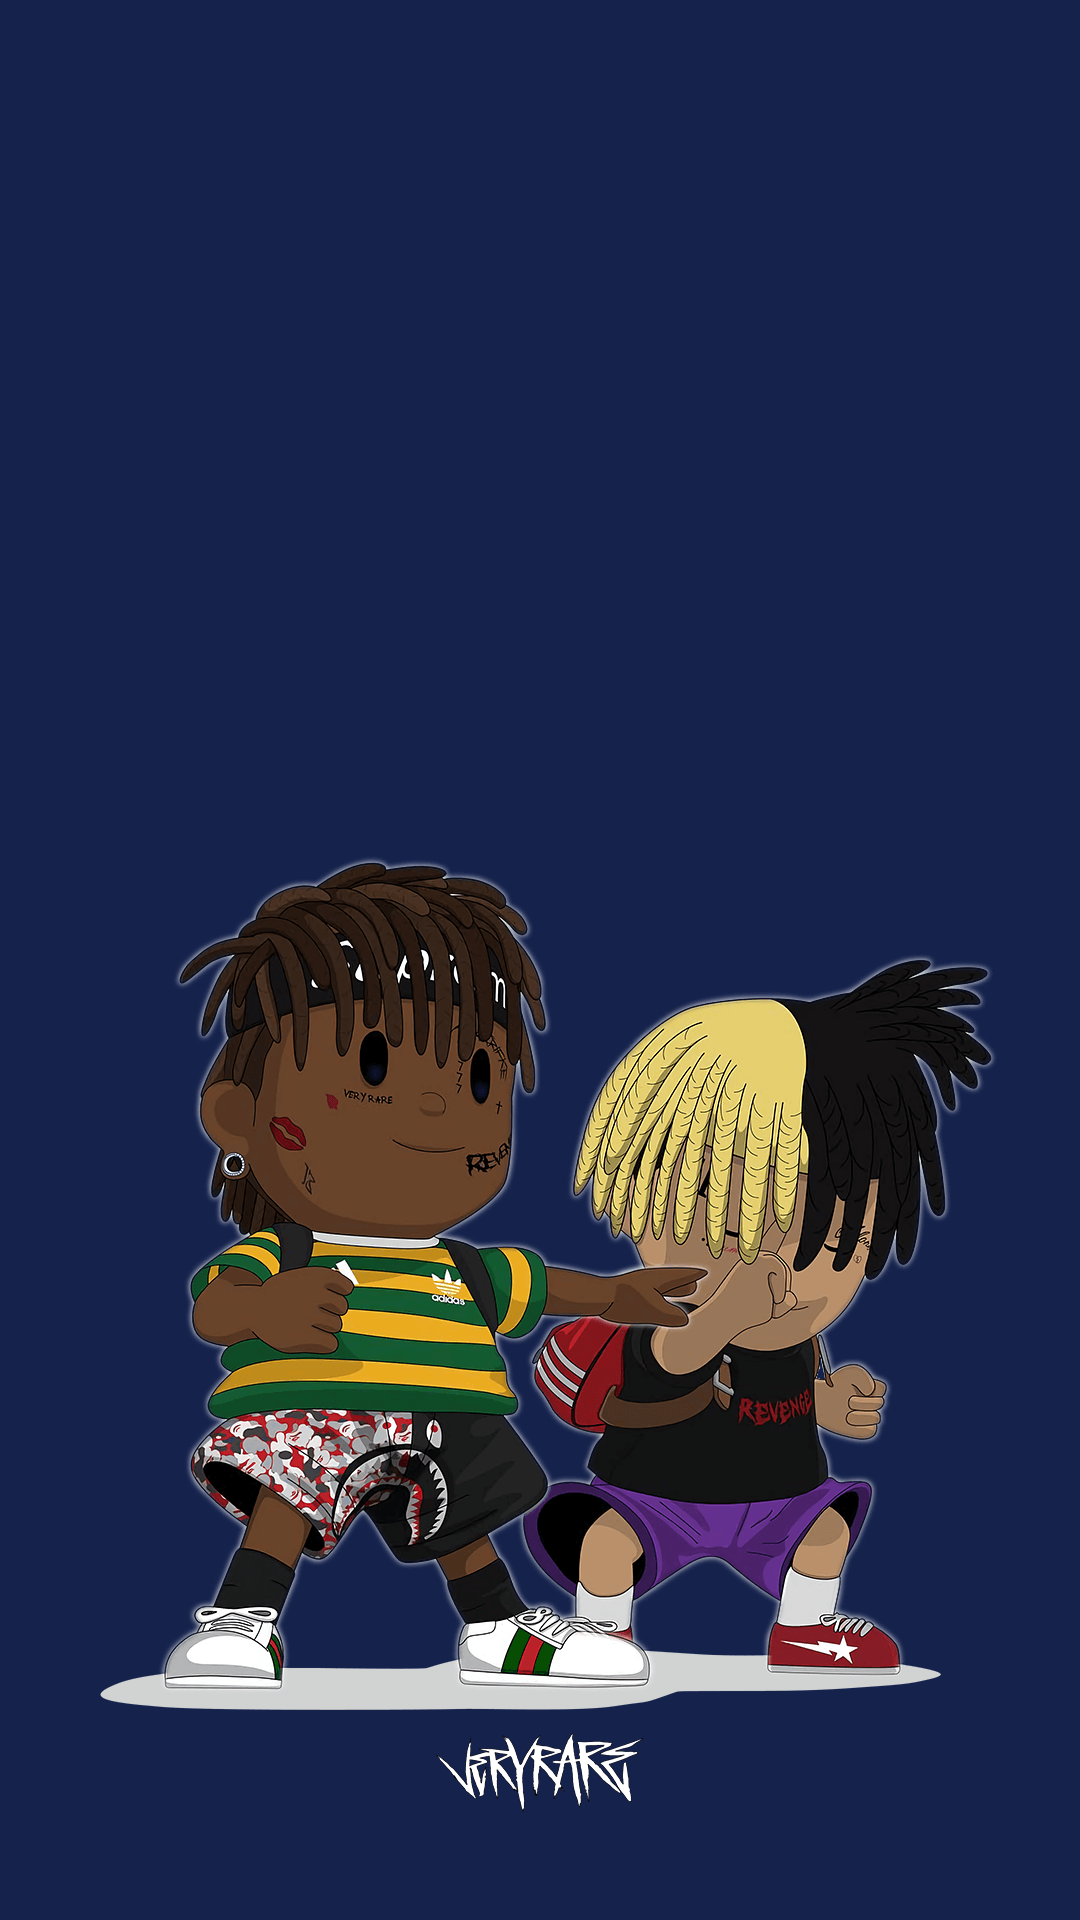 Juice Wrld Anime Ps4 Wallpapers - Wallpaper Cave